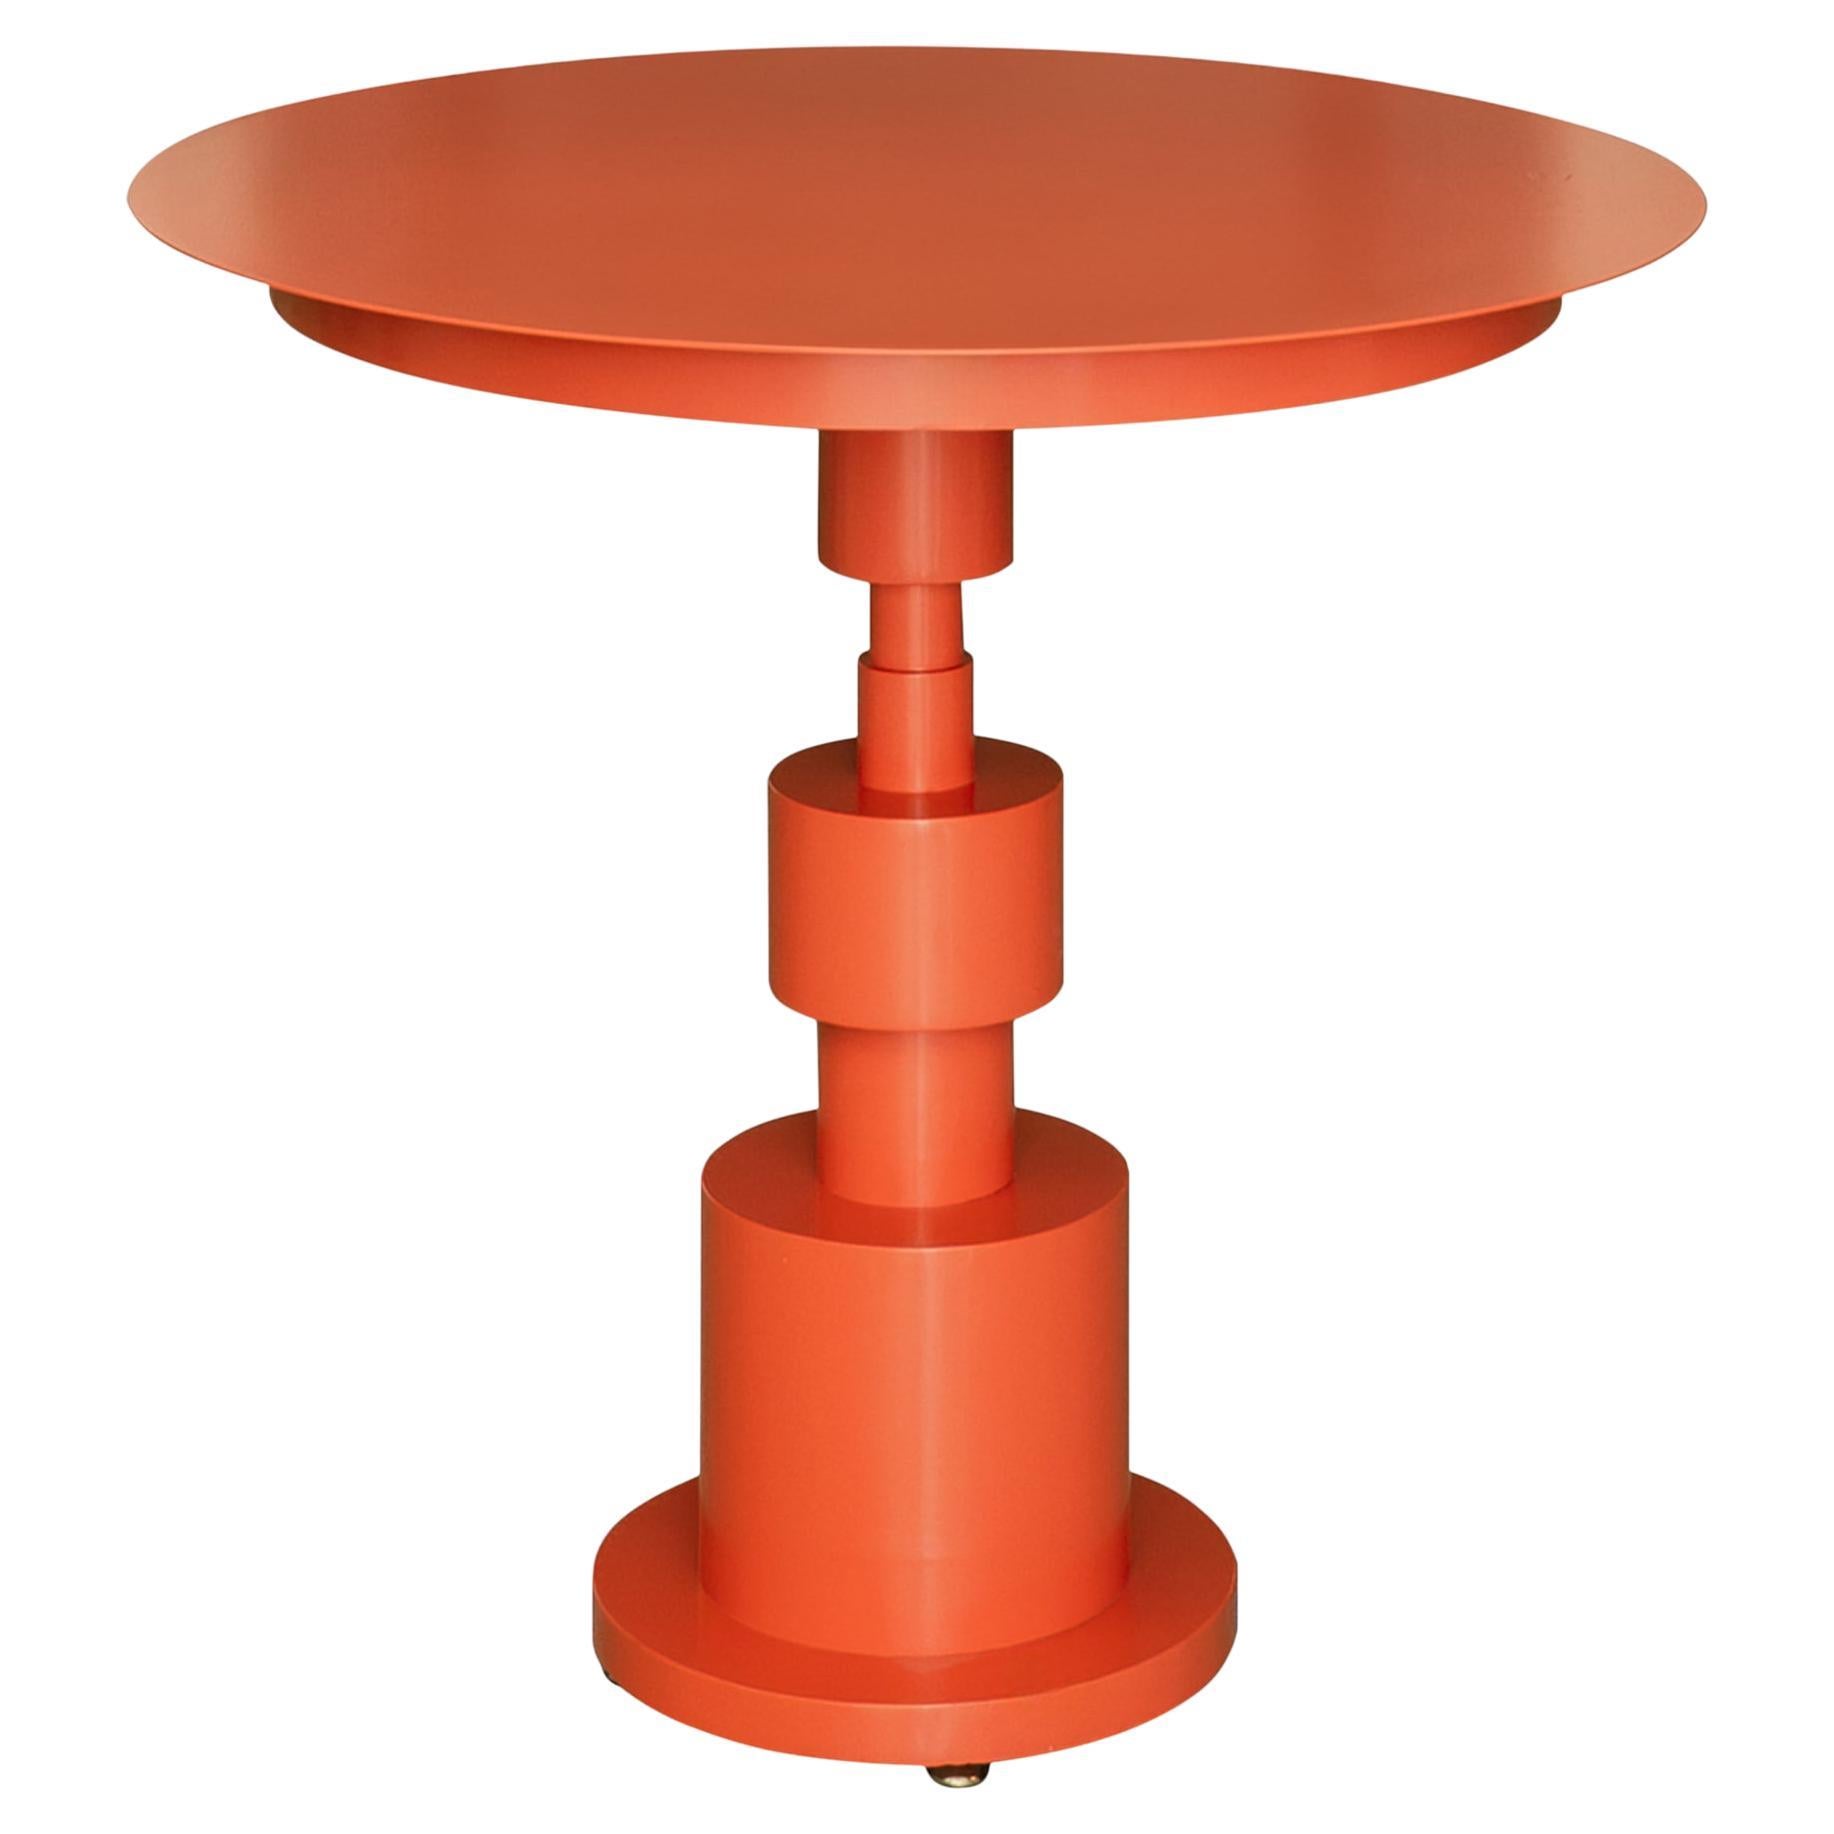 Table d'appoint Cyrcle périplo